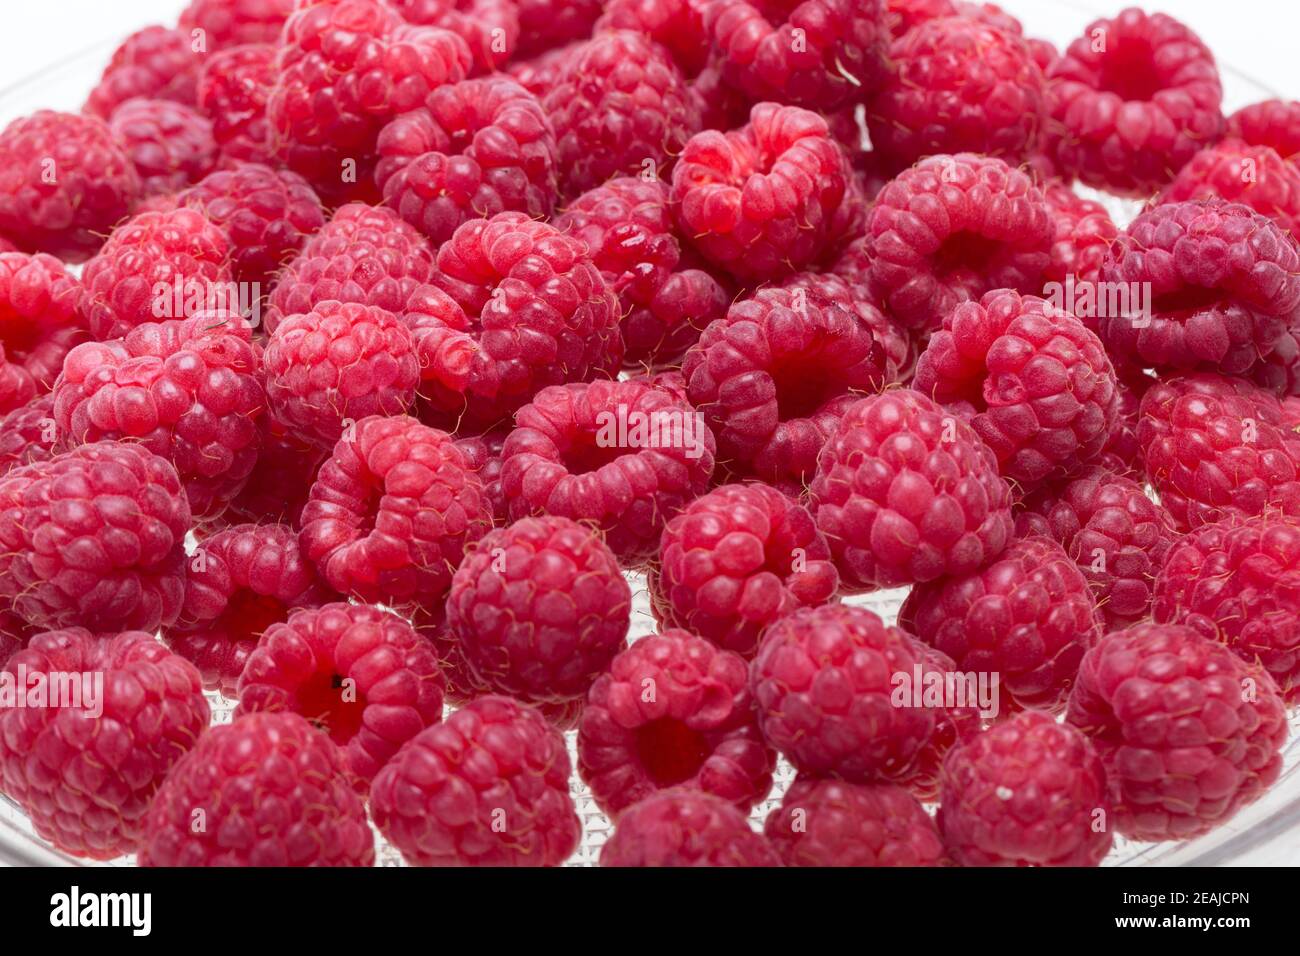 A beautiful selection of freshly picked ripe red raspberries. Stock Photo